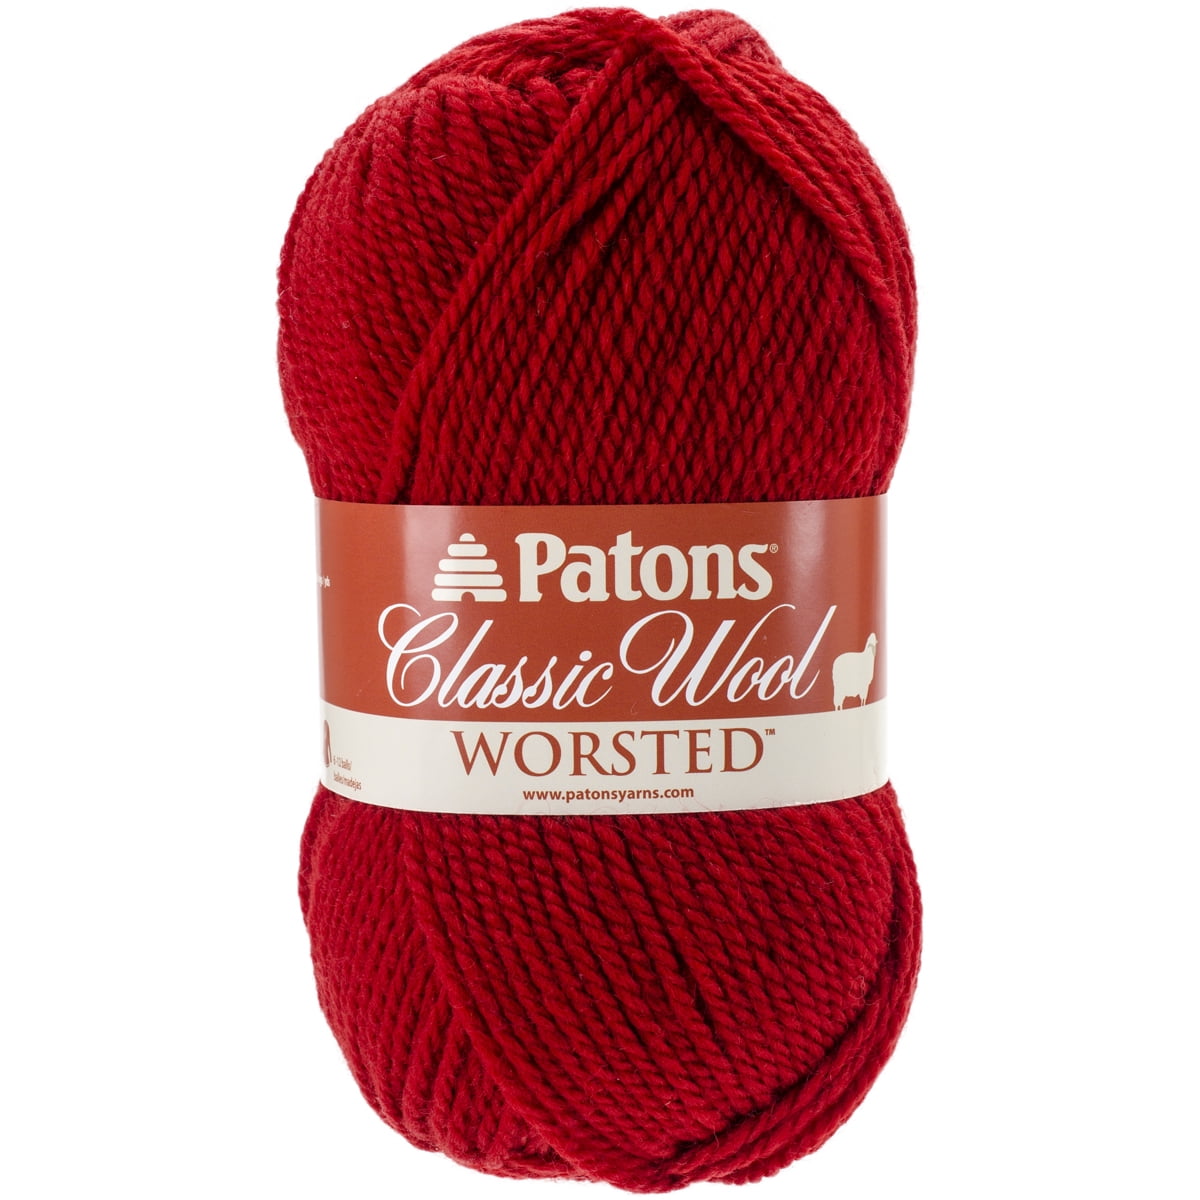 Patons Classic Wool Roving Yarn-Cherry, 1 count - Smith's Food and